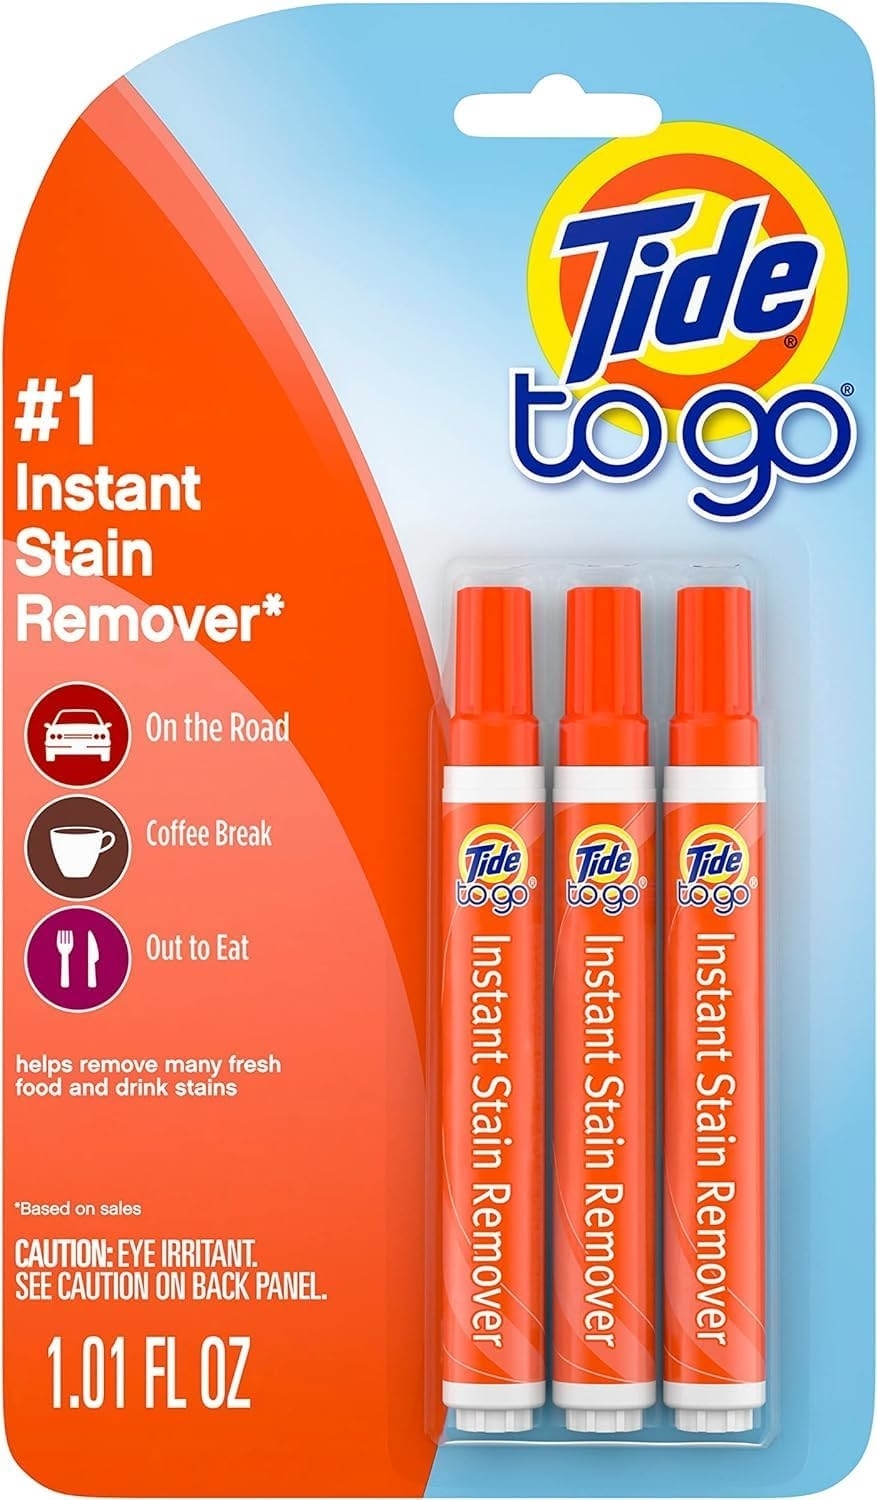 Three Tide to Go instant stain remover pens in packaging, emphasizing portable stain treatment